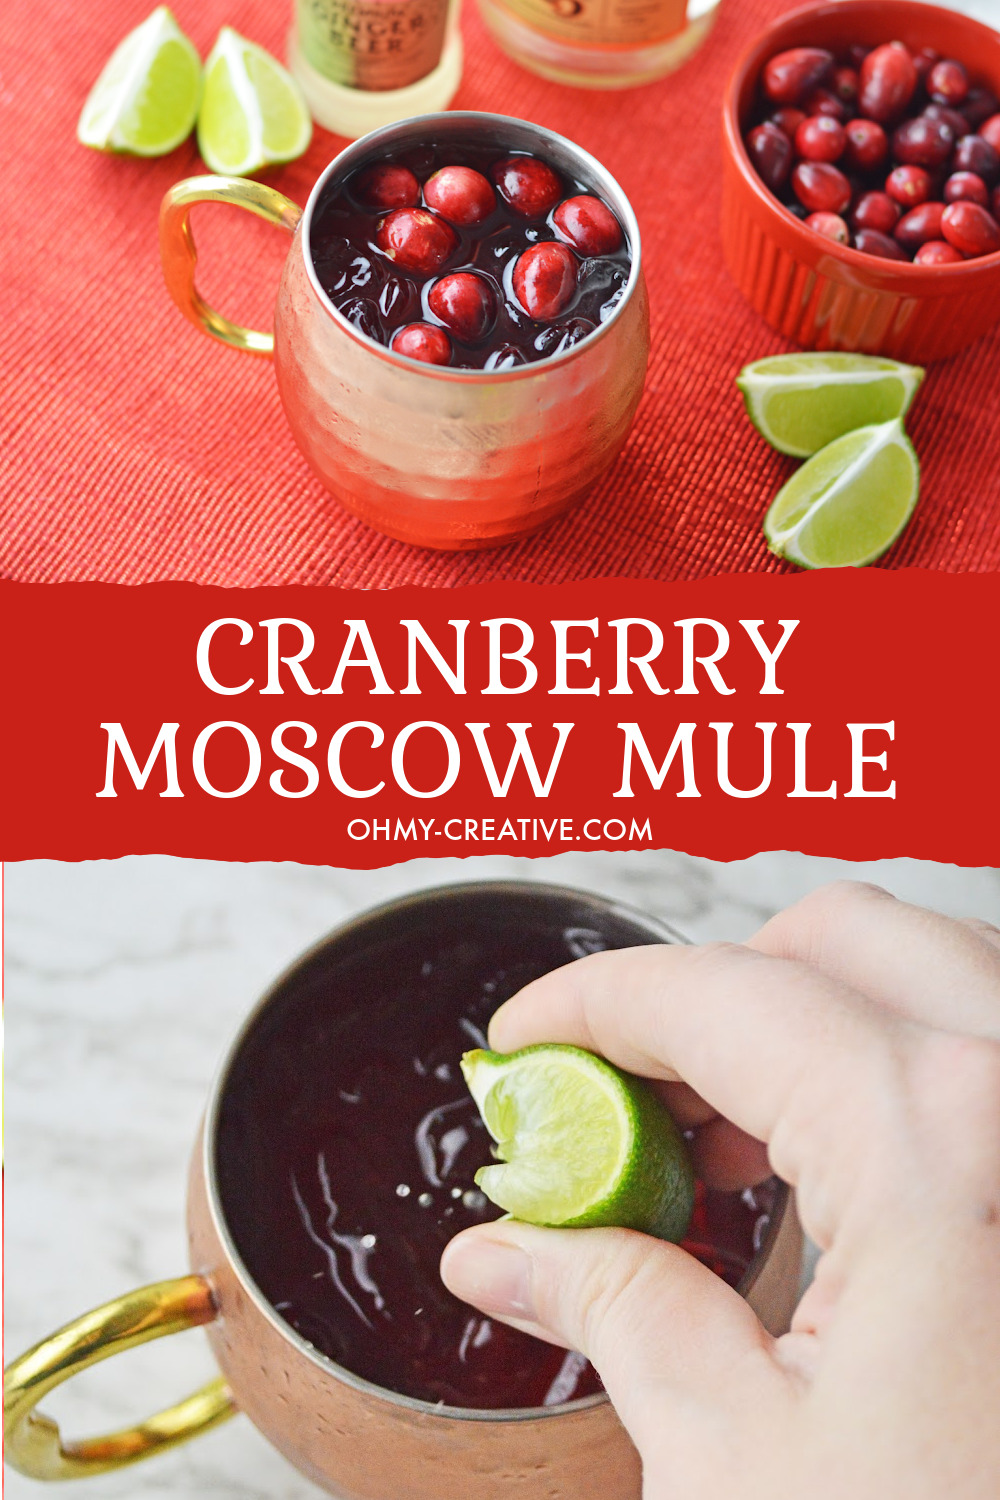 Fresh cranberries garnish this Christmas cranberry Moscow mule.